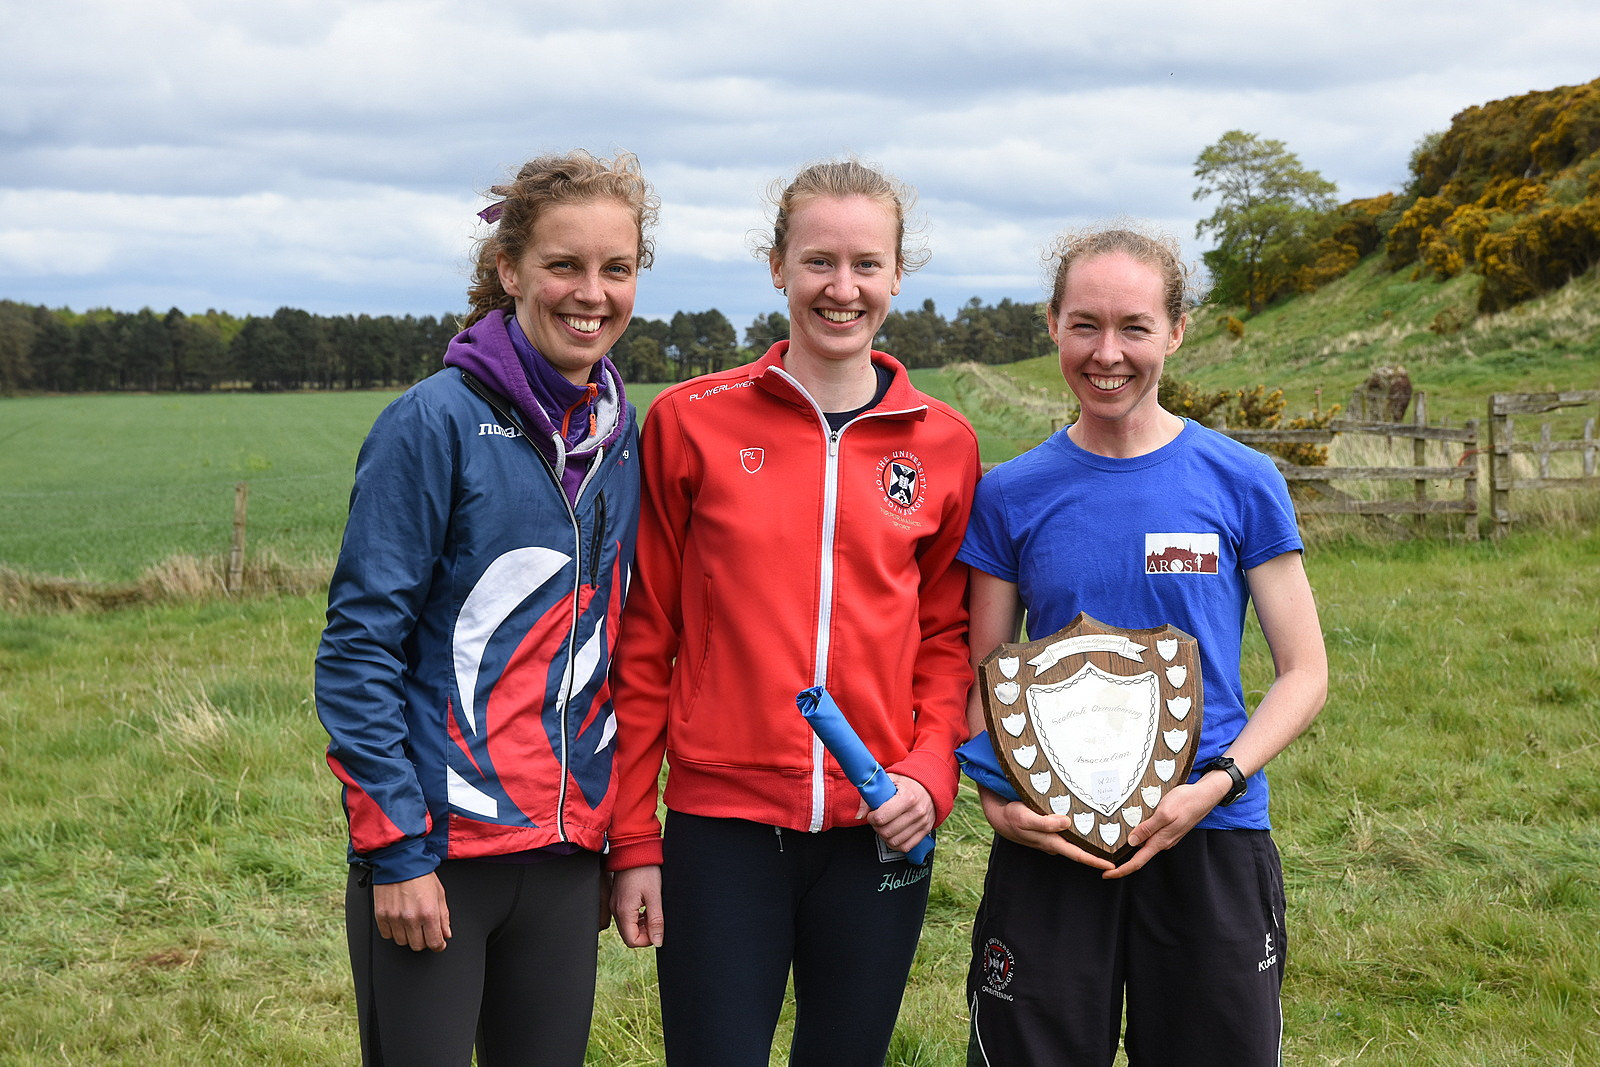 Three female orienteers with trophy at Scottish Orienteering Championships in the Scottish Countryside